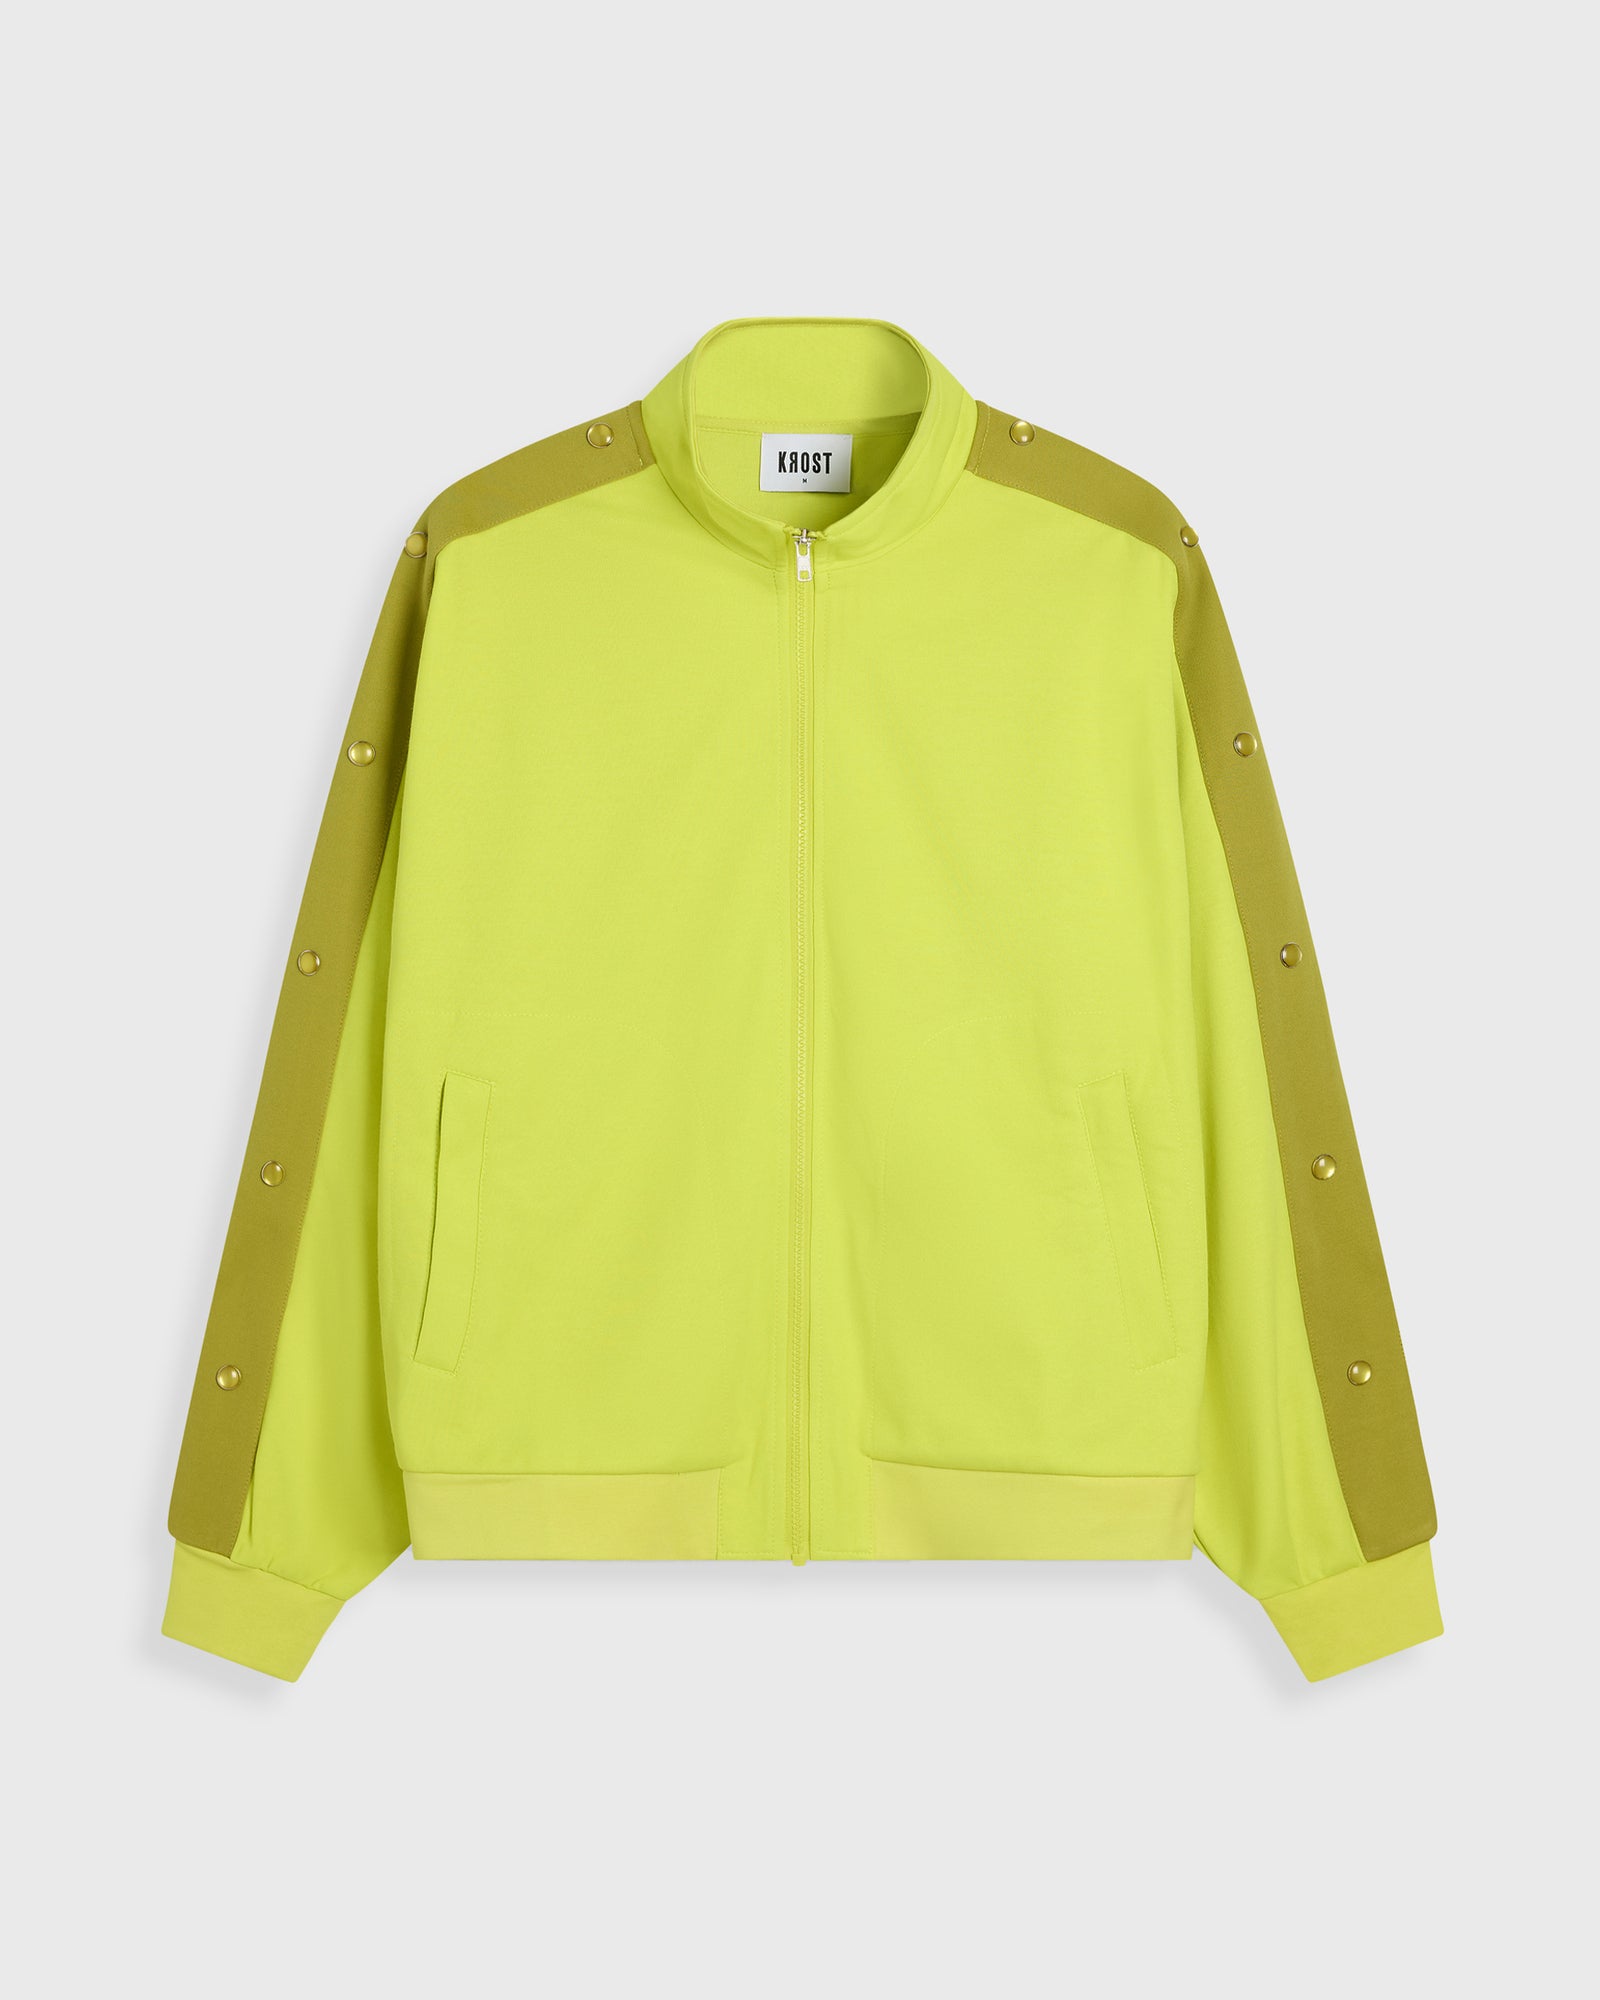 Bright neon yellow hardware deco track jacket unisex fit for men & women